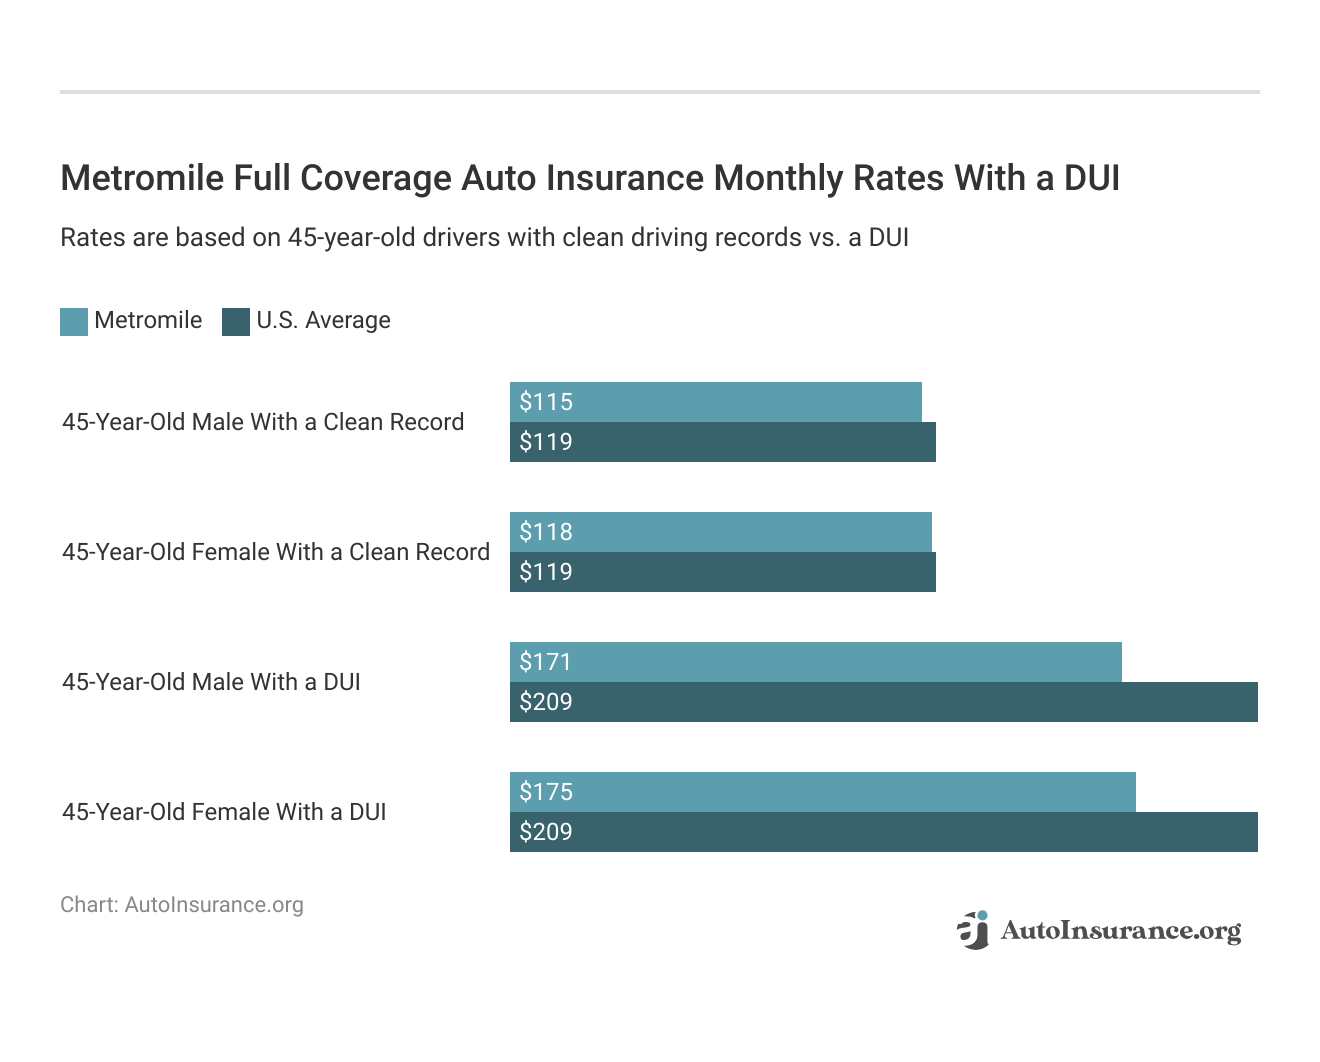 <h3>Metromile Full Coverage Auto Insurance Monthly Rates With a DUI</h3>